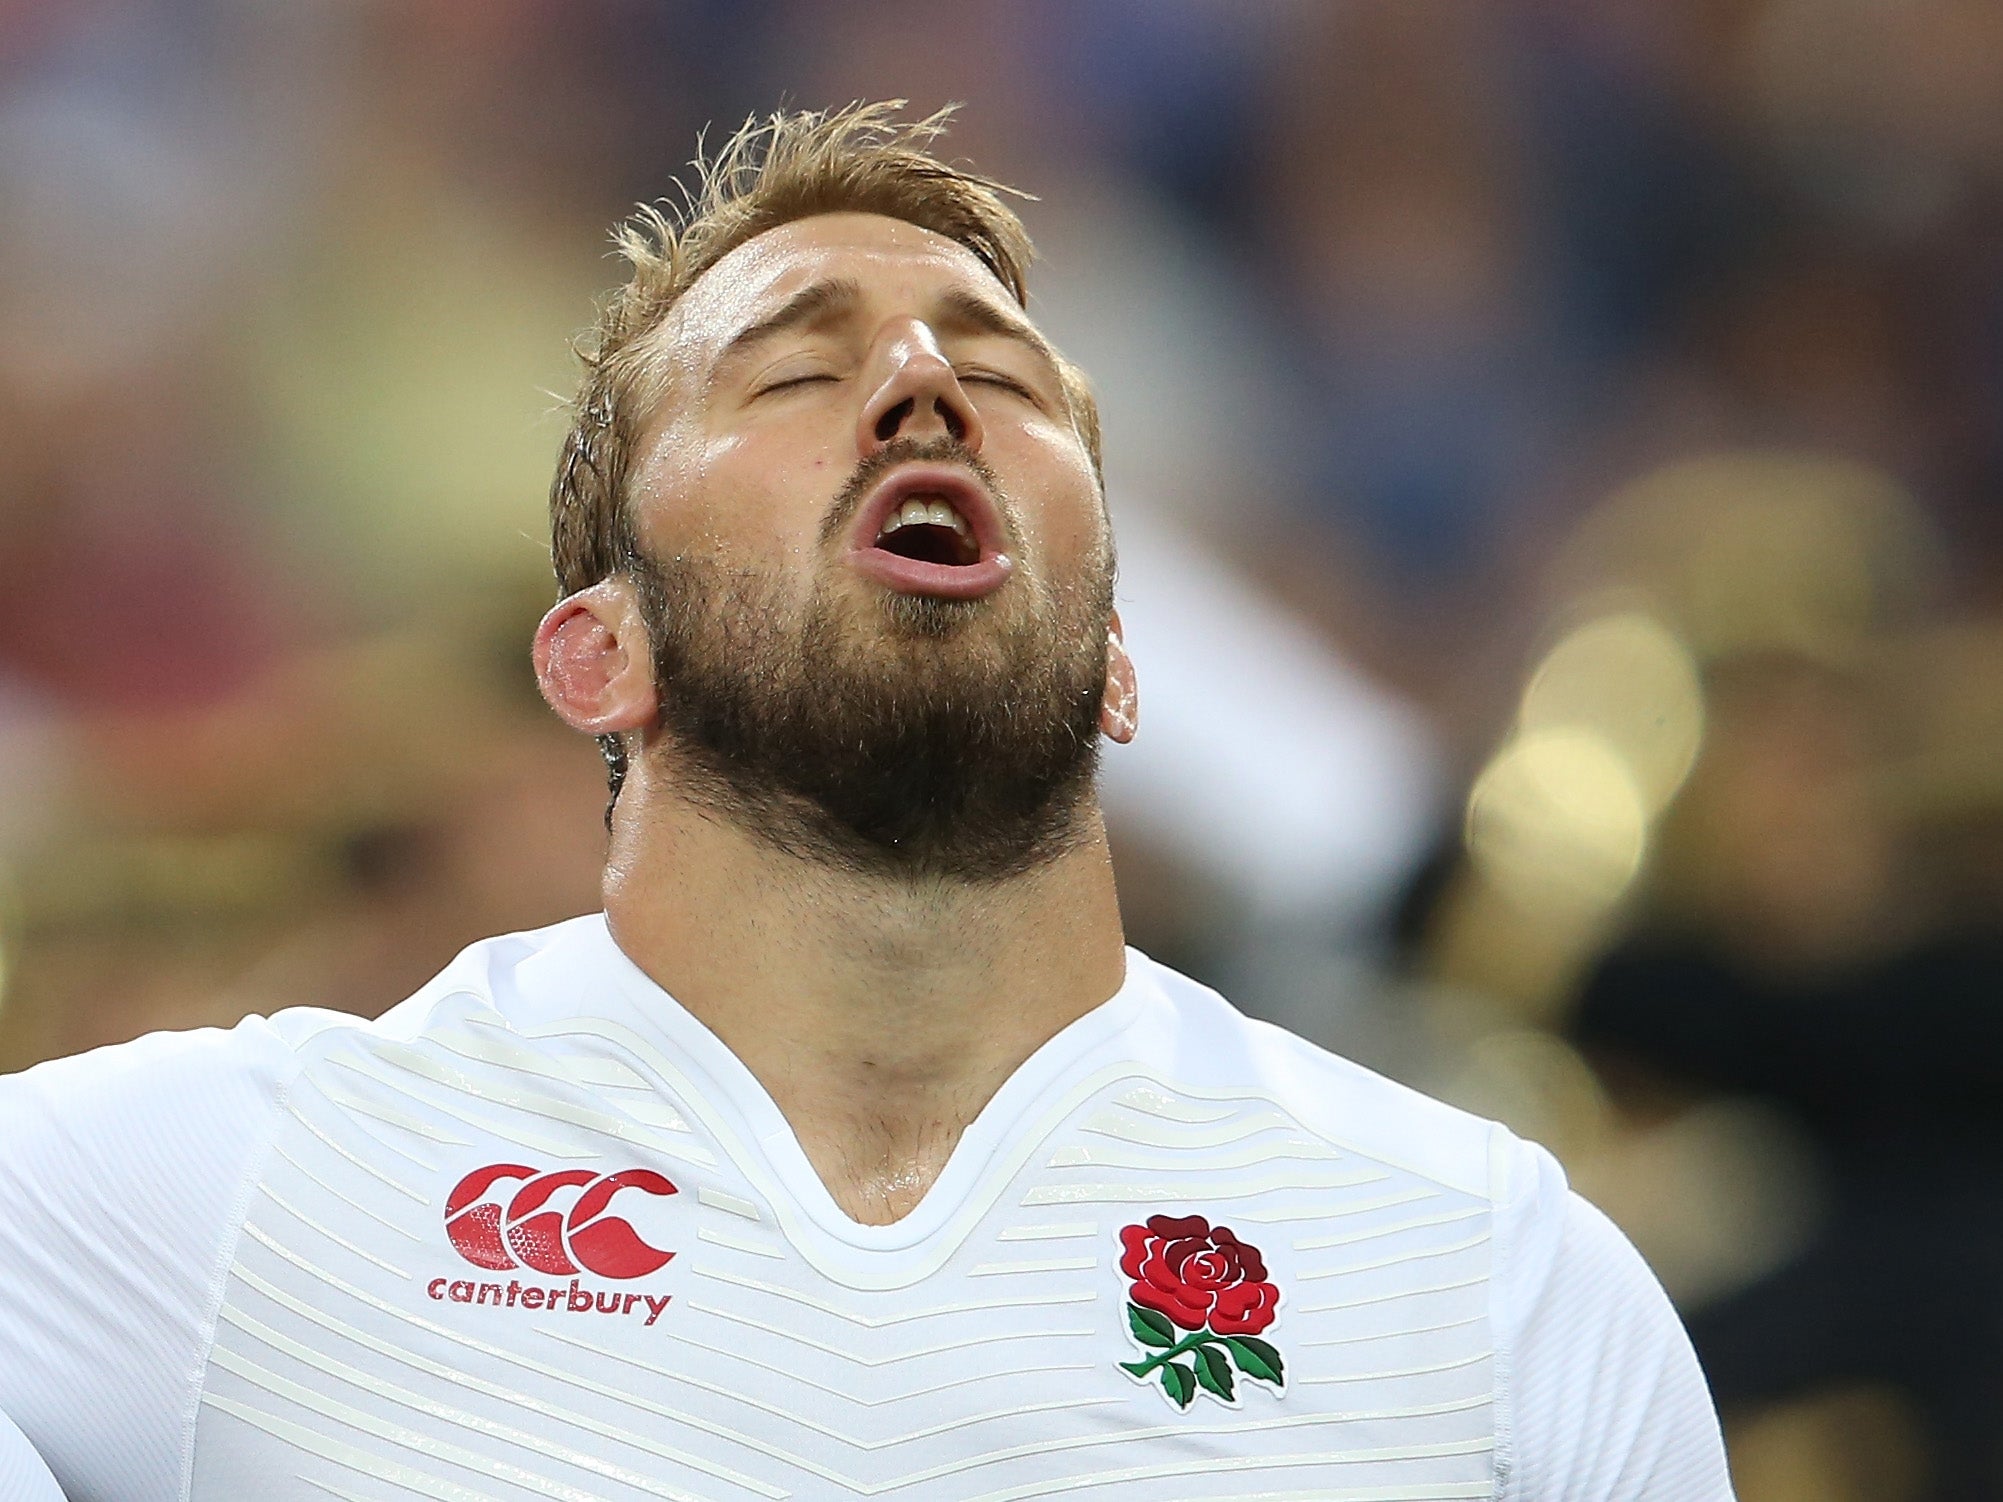 Chris Robshaw sings the national anthem, God Save the Queen